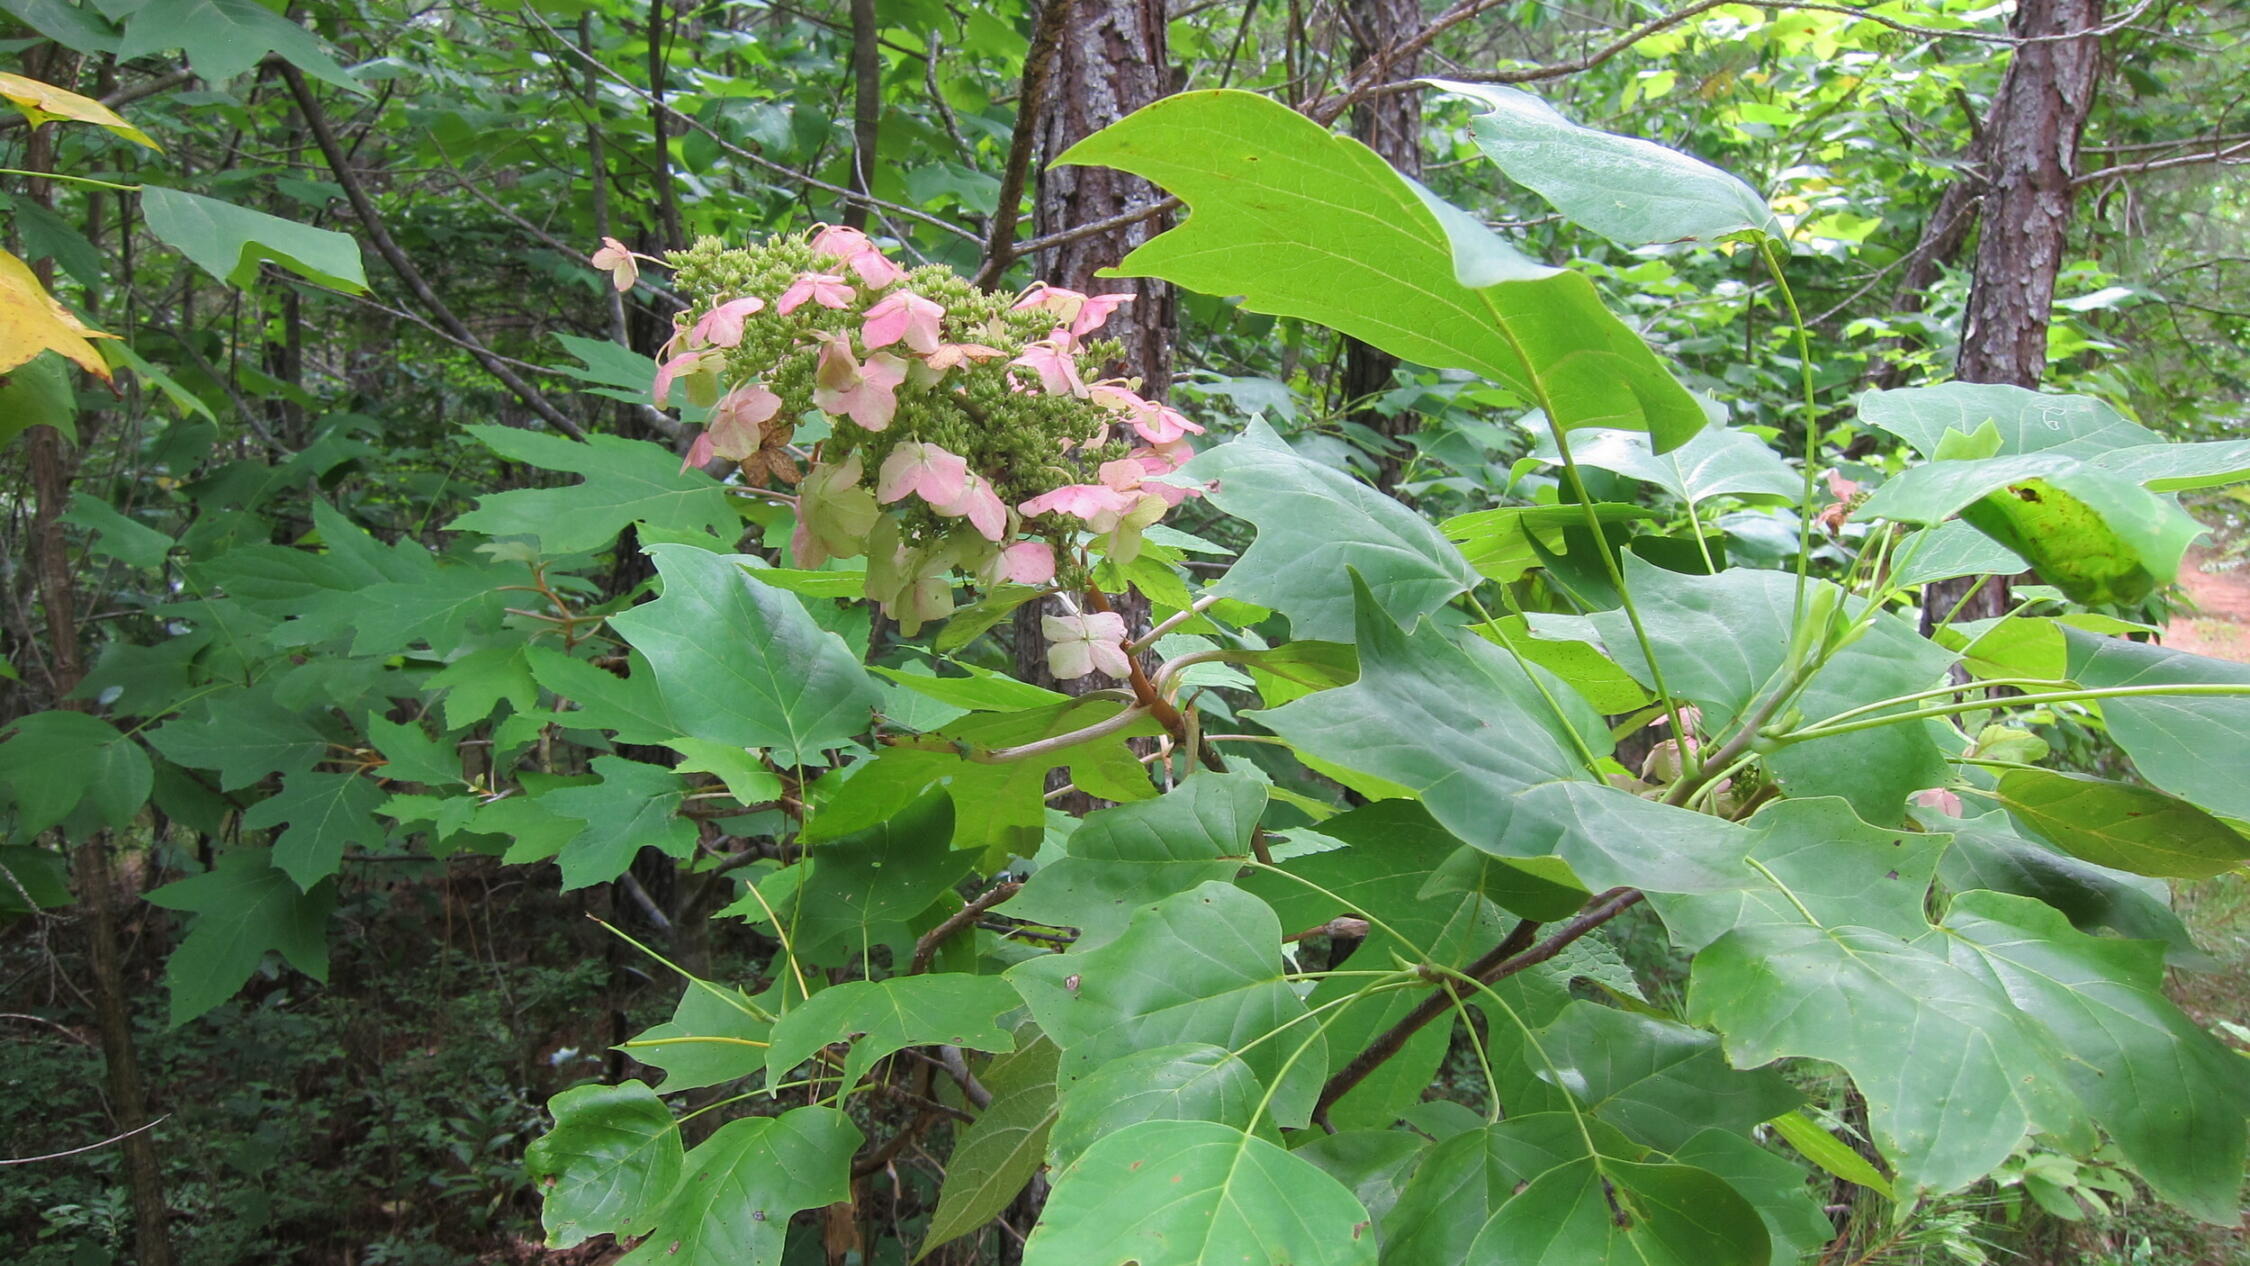 View of flowers and plants in a forest